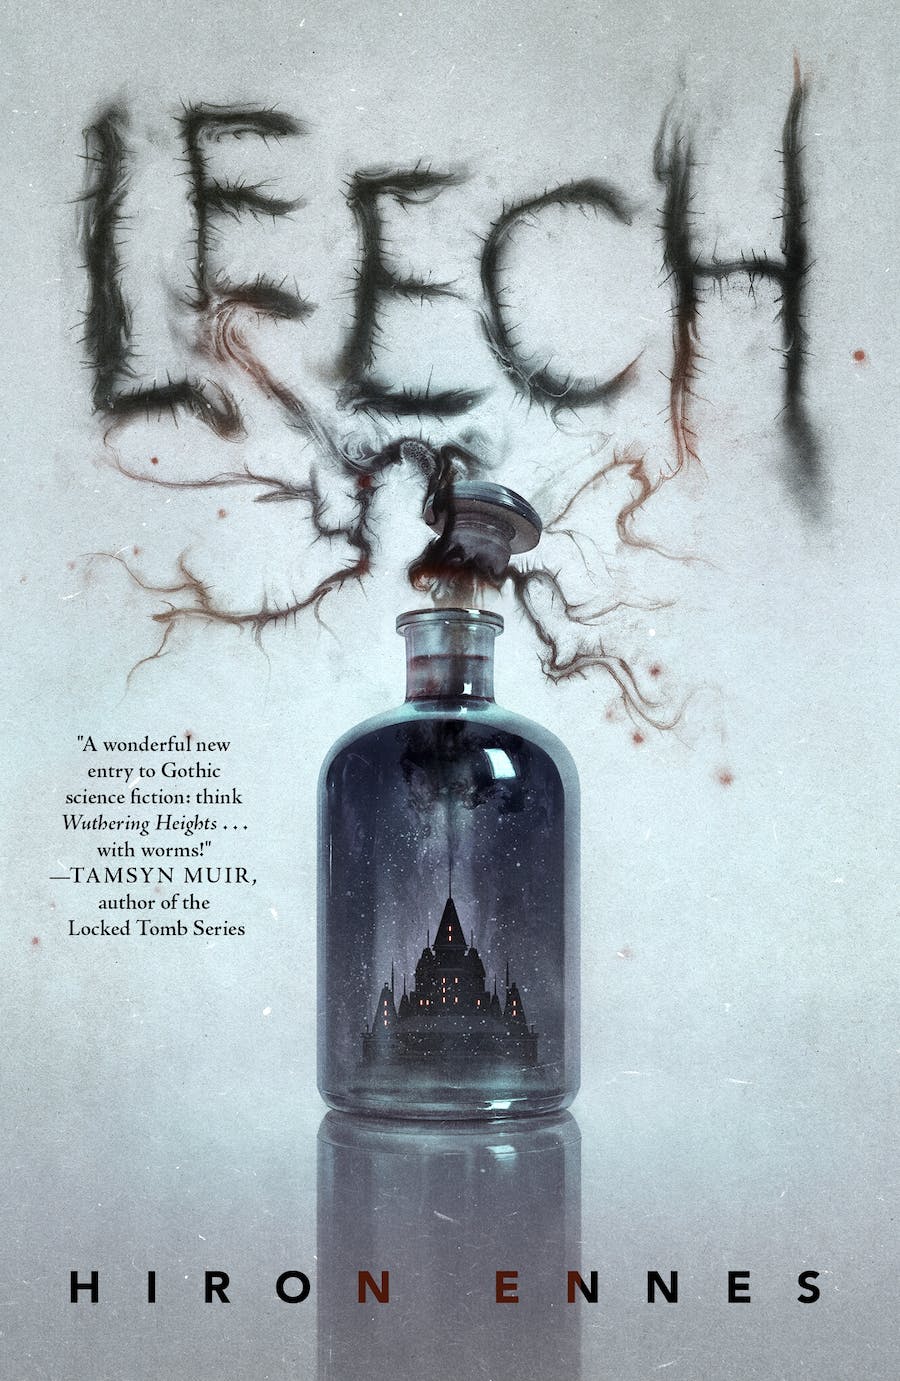 Book cover LEECH by Hiron Ennes